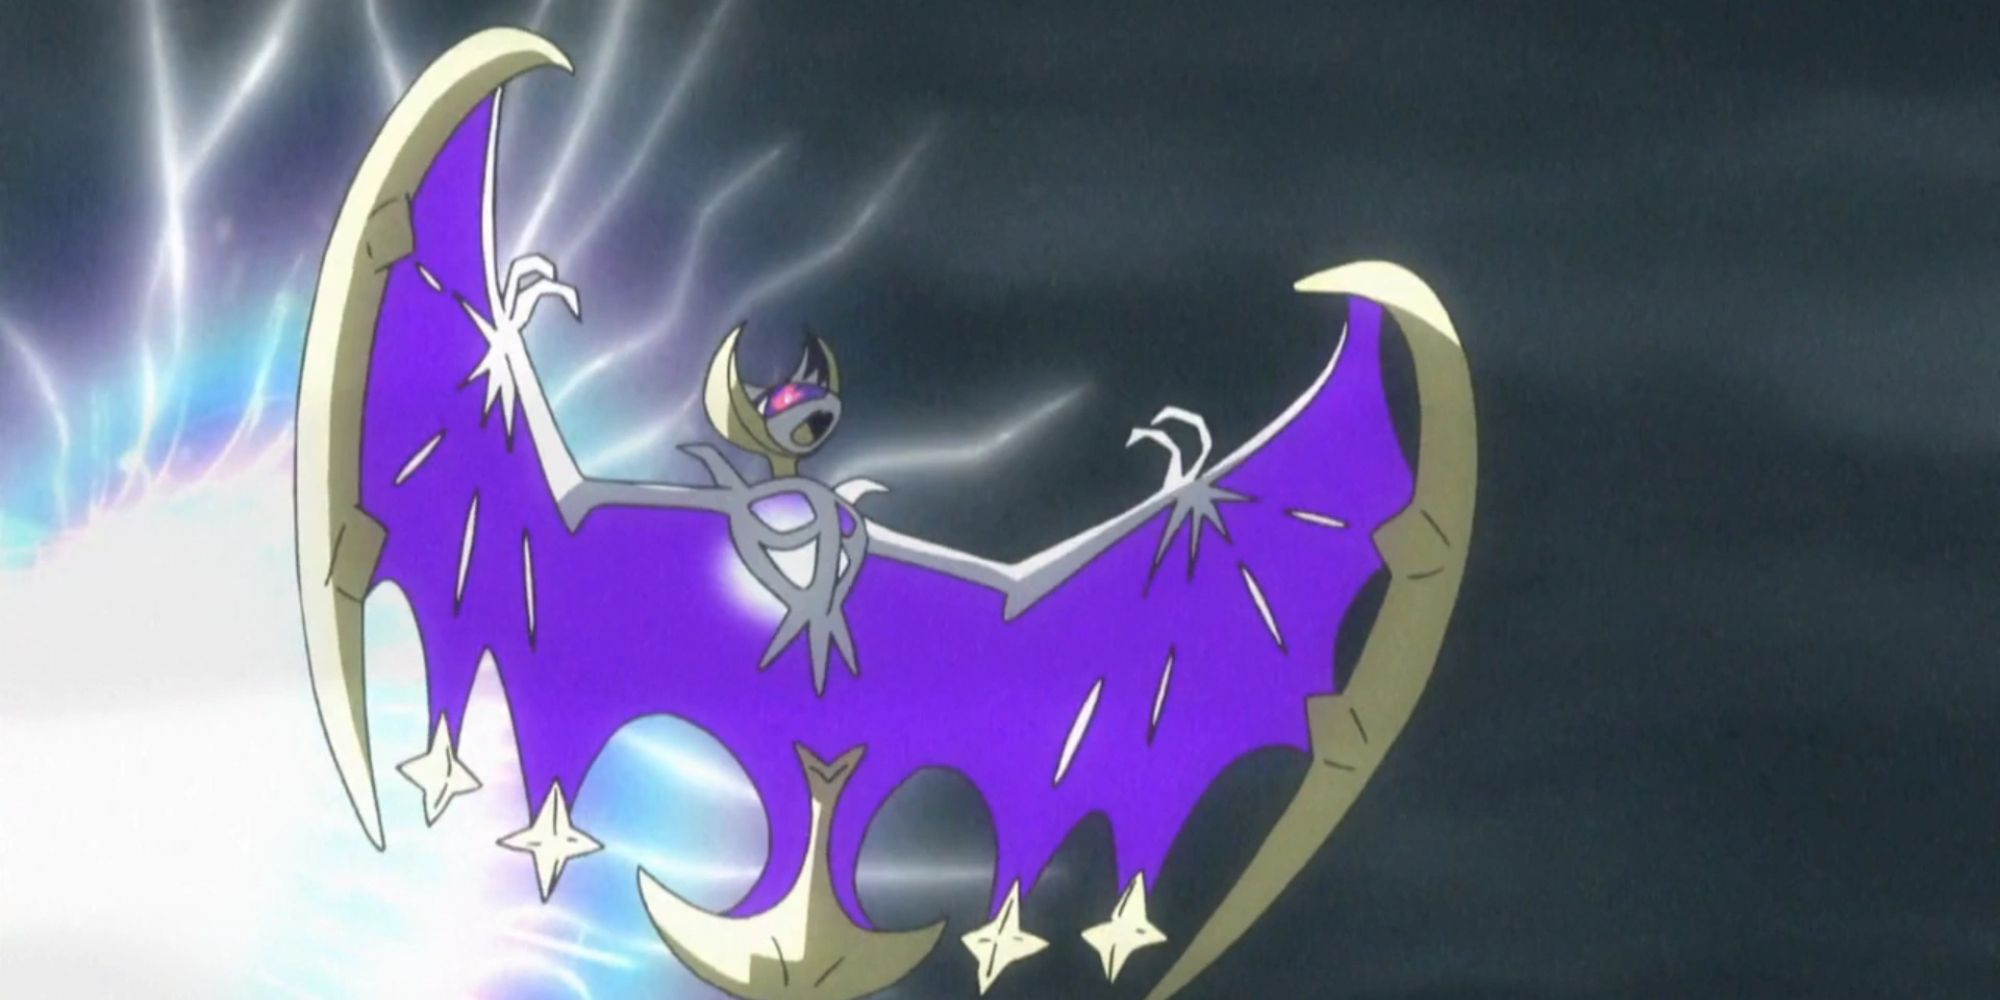 Lunala reacting to a wormhole in the anime